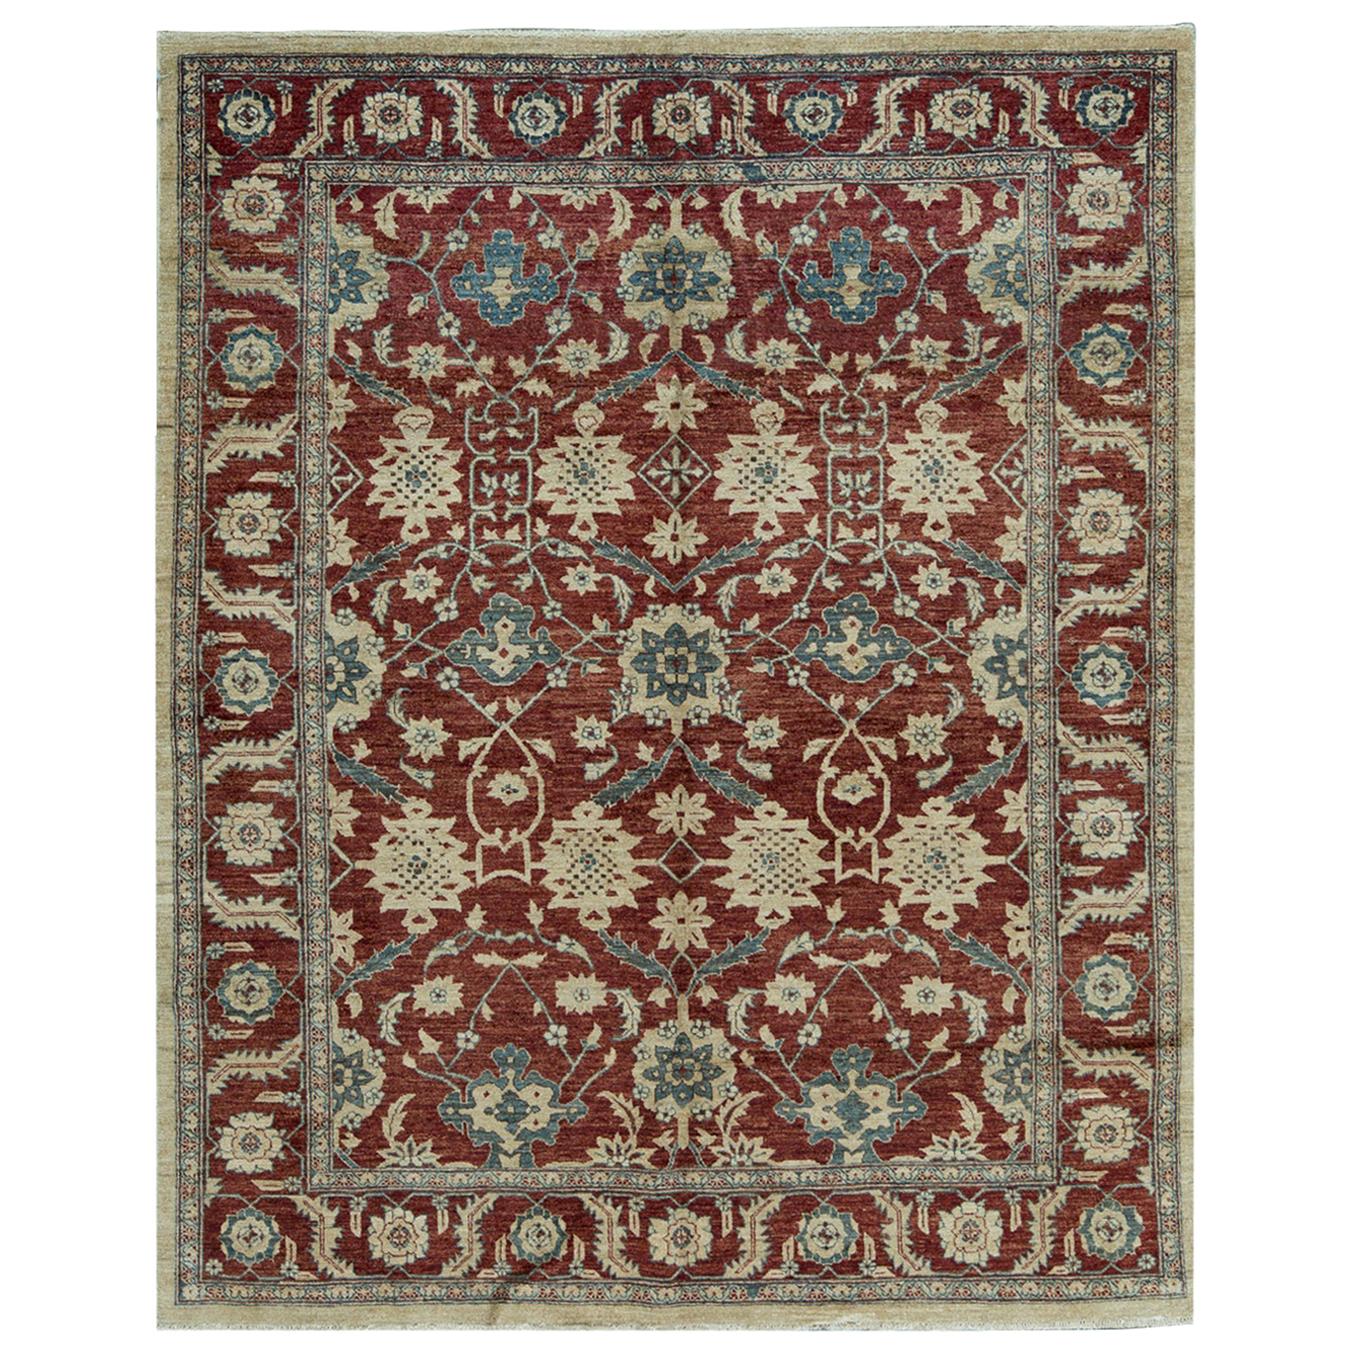 One-of-a-Kind Traditional Handwoven Wool Area Rug 6'10 x 8'6 For Sale